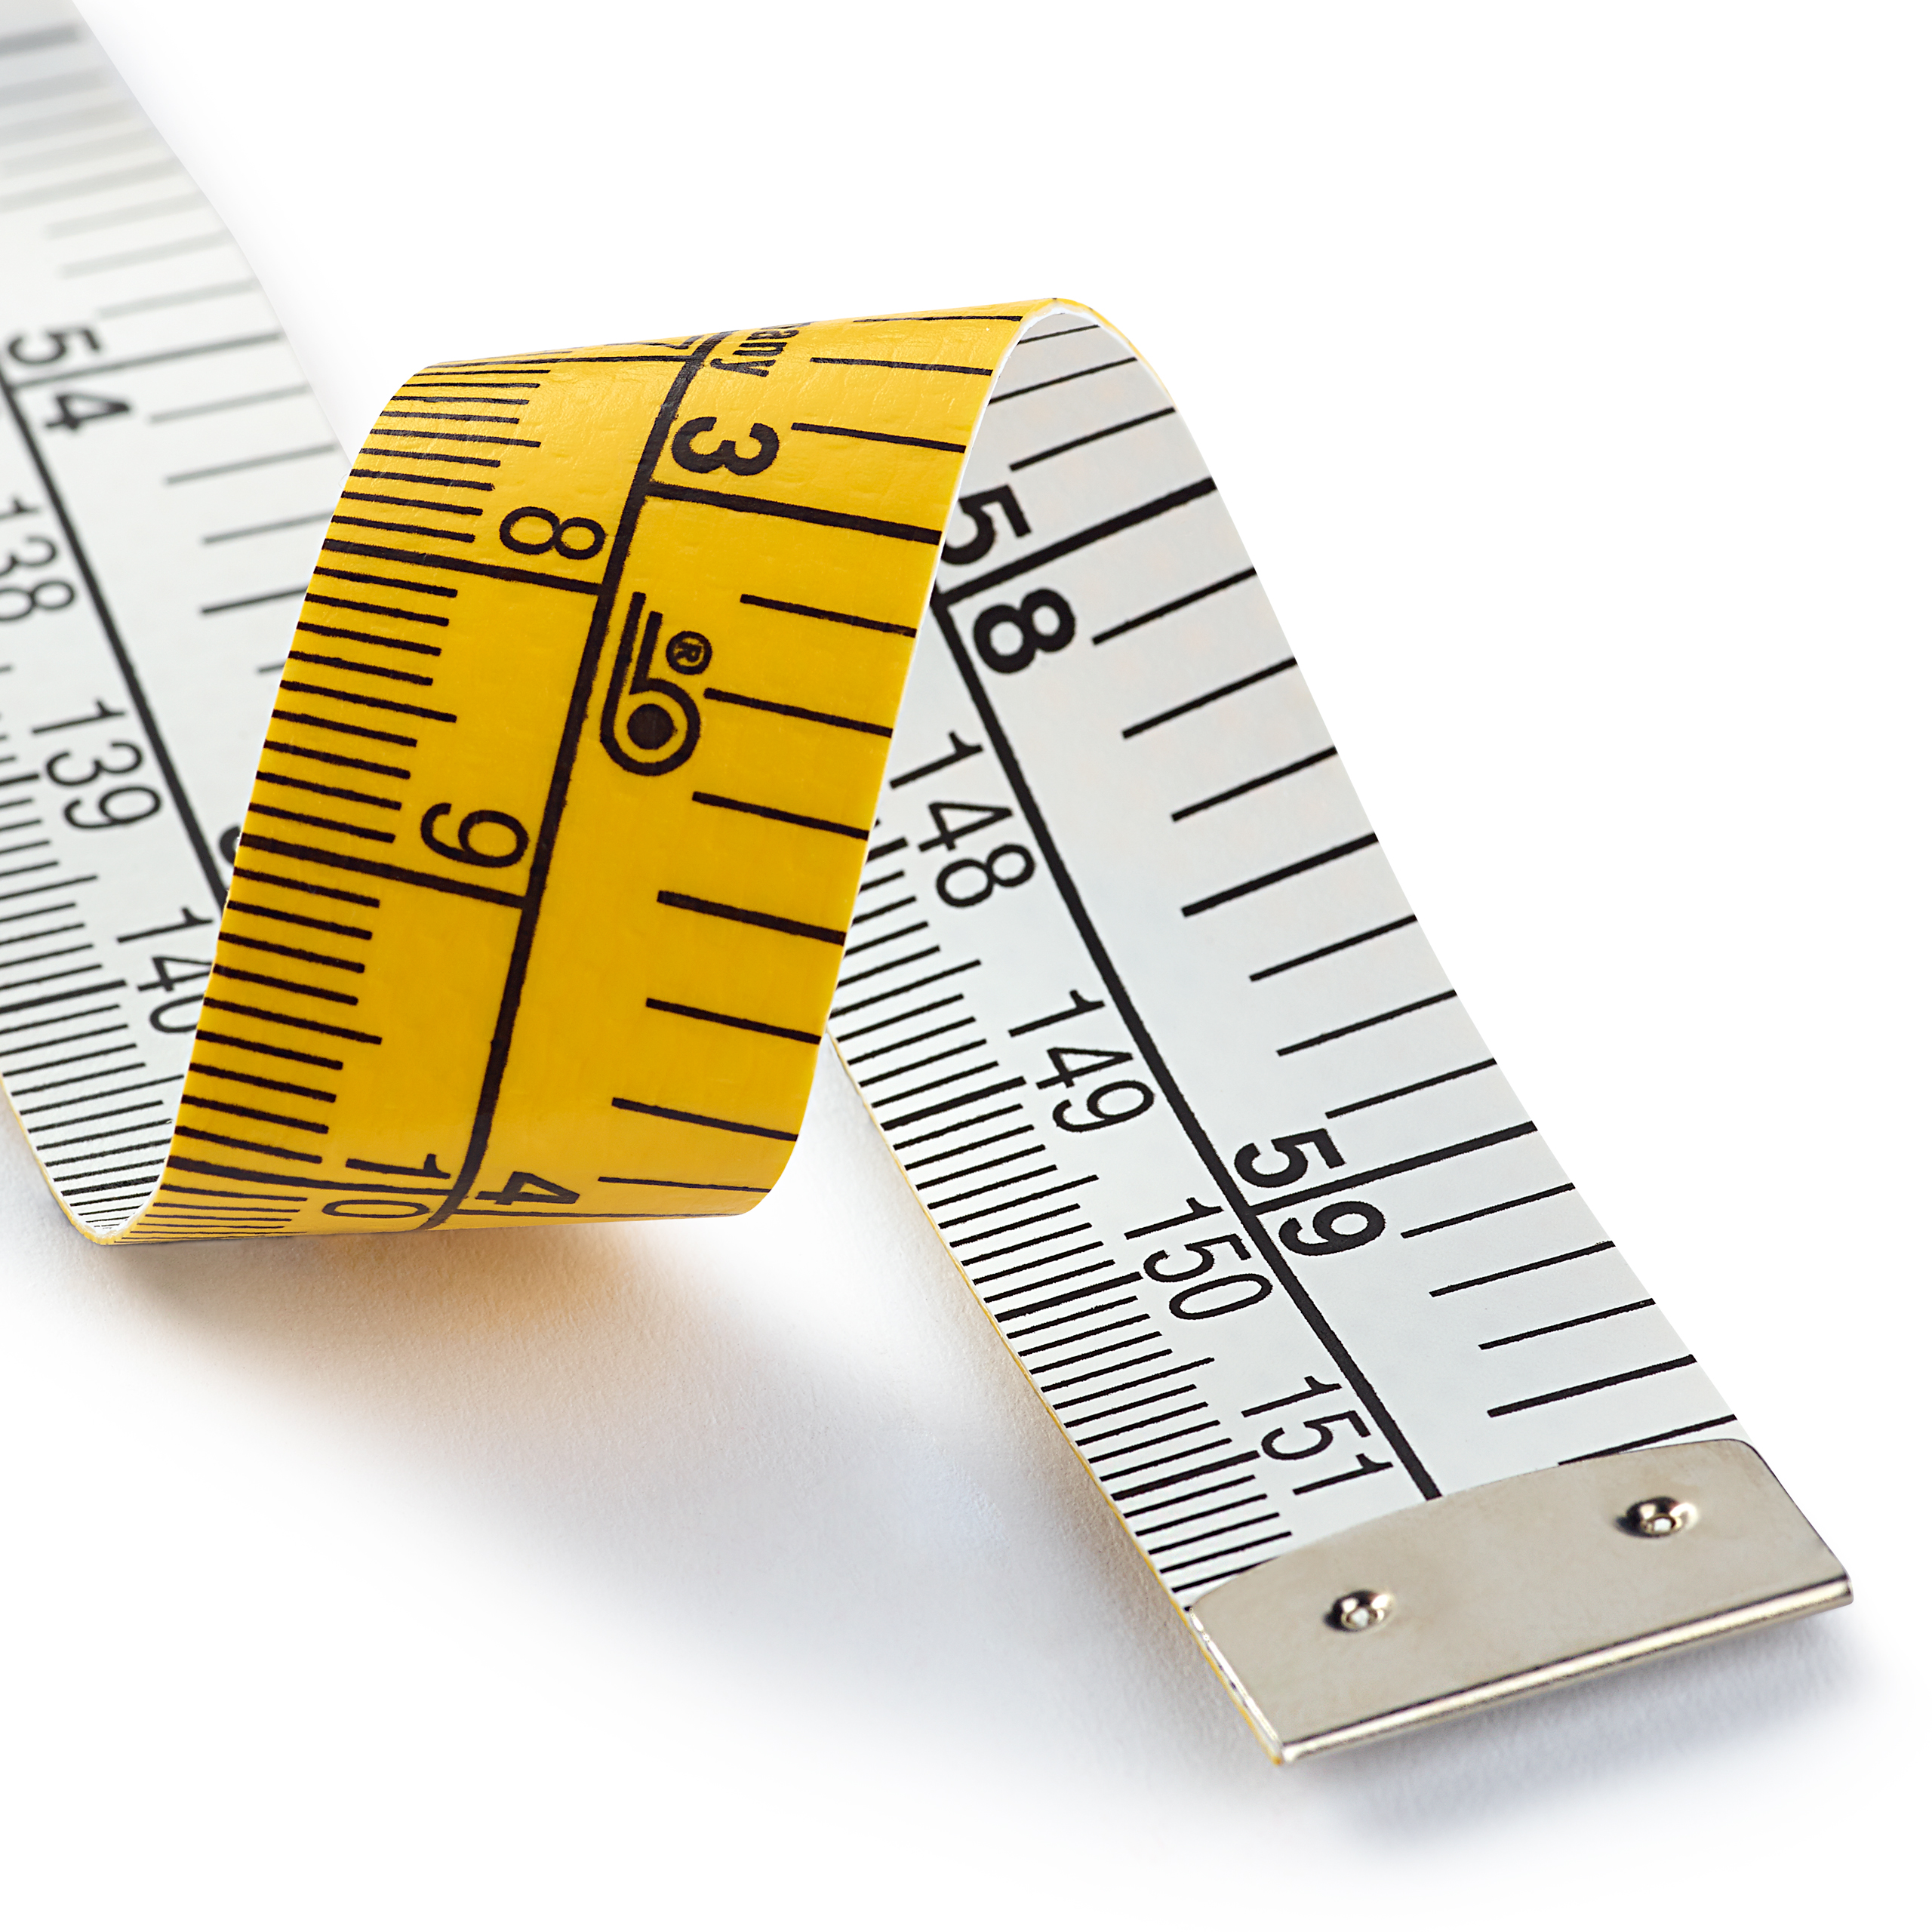 Tape Measure Color Analogical 150 cm 60 inch, 1 St